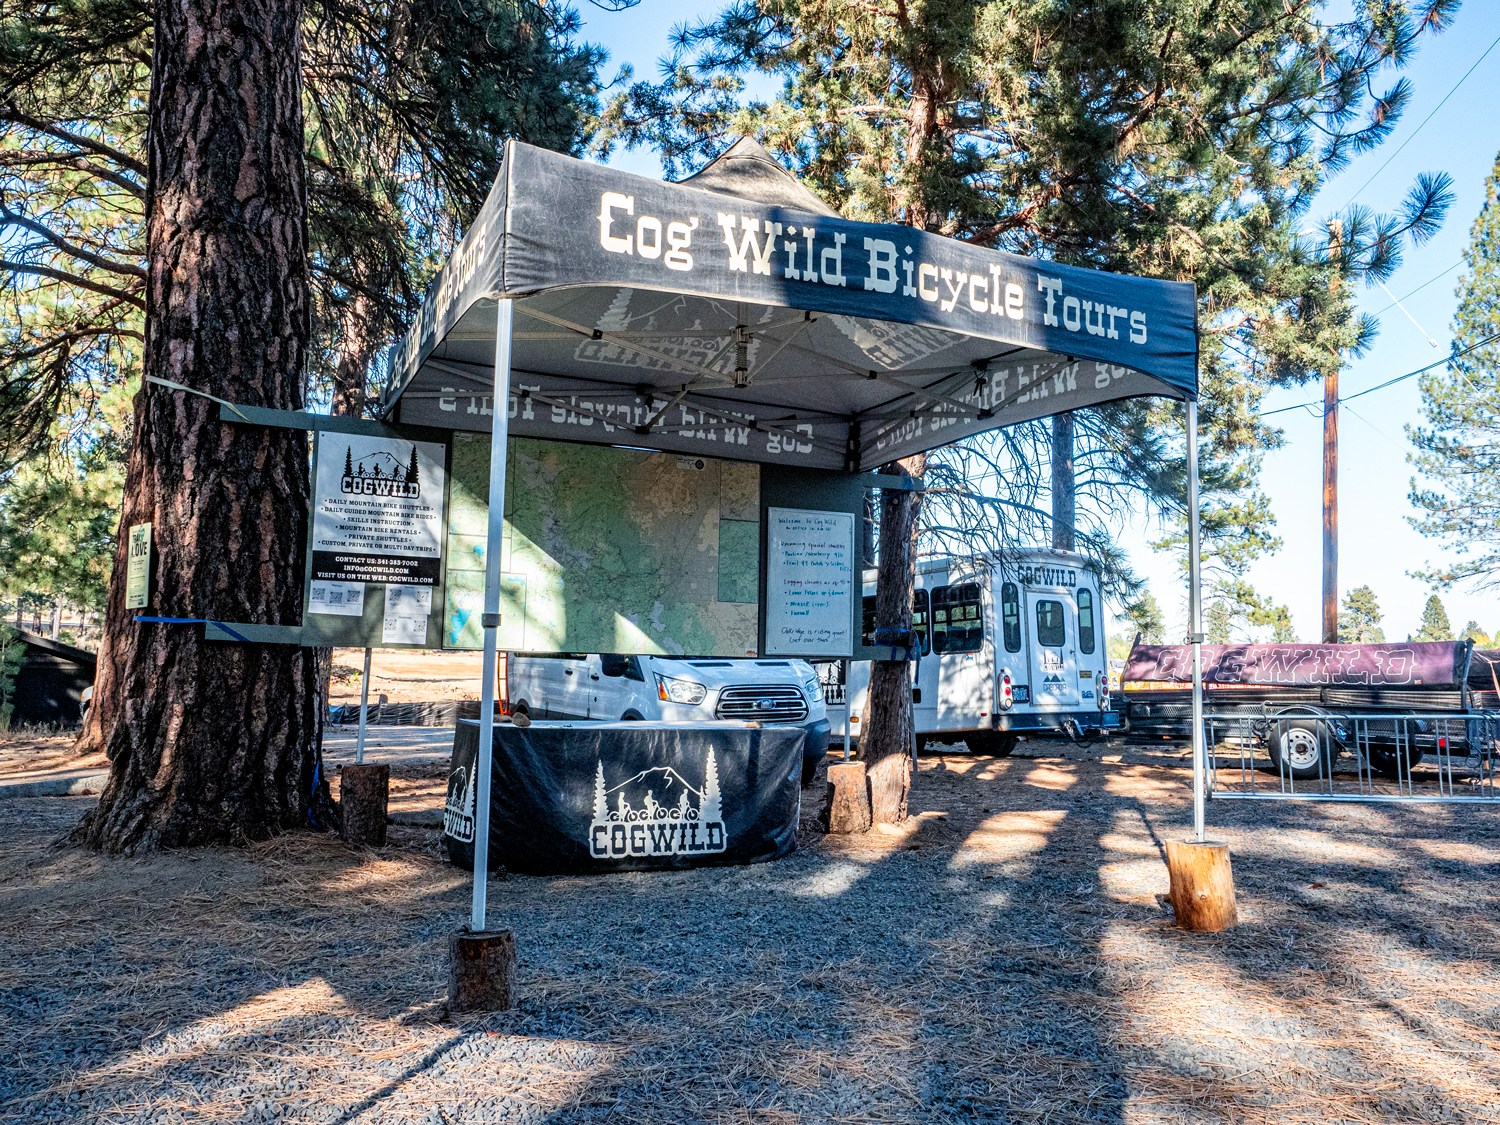 Cog Wild information booth at their offices in Bend Oregon